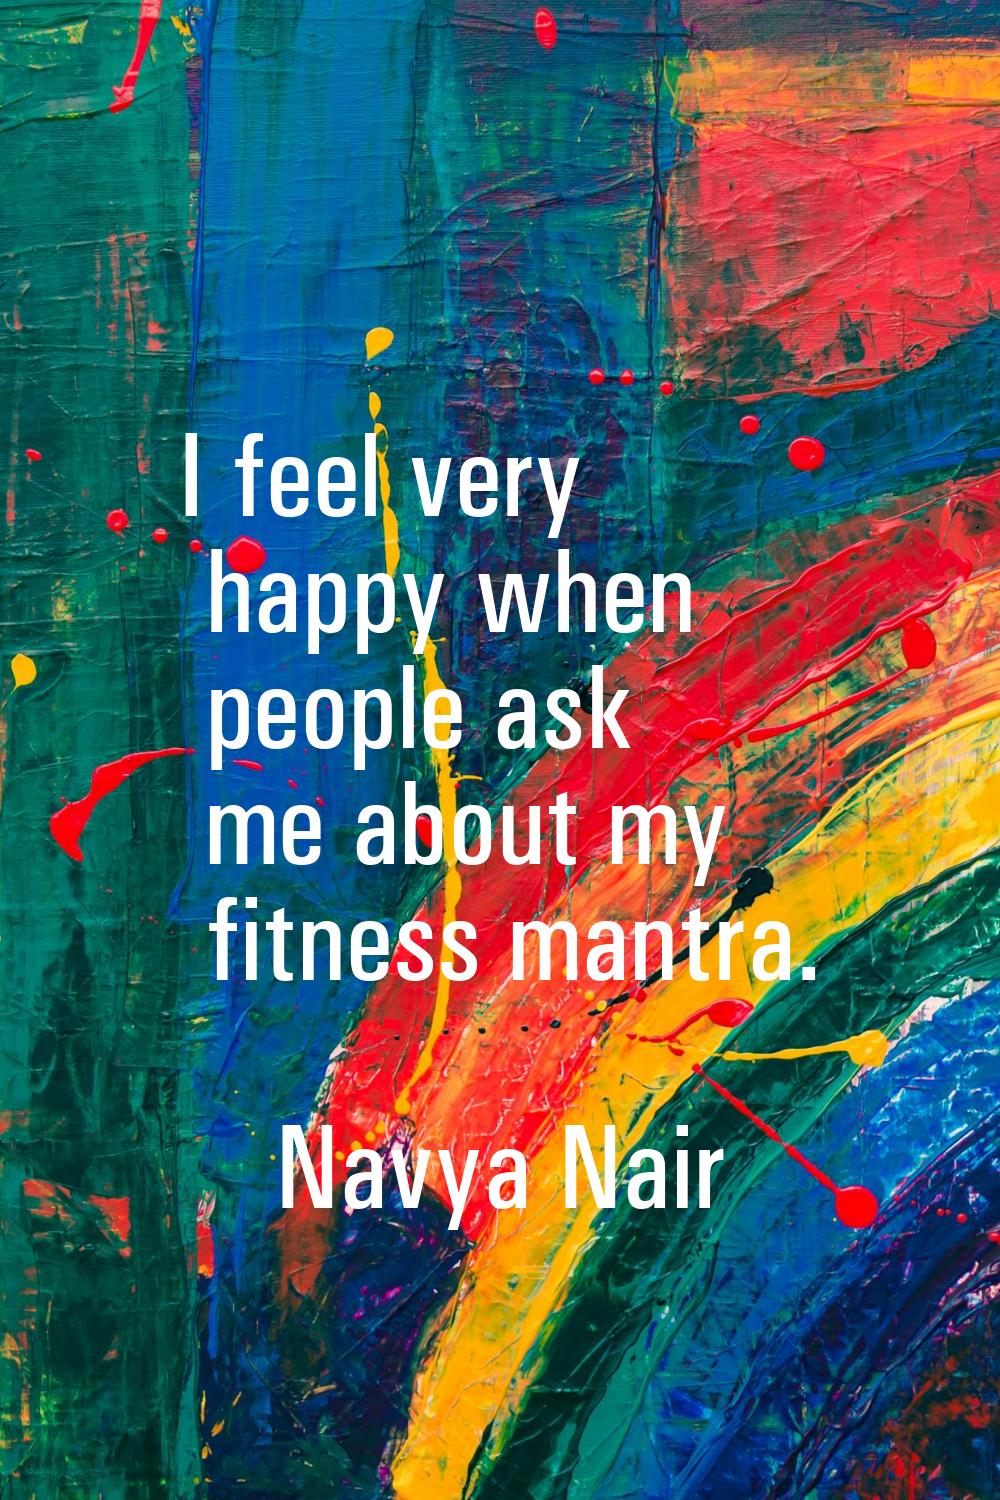 I feel very happy when people ask me about my fitness mantra.